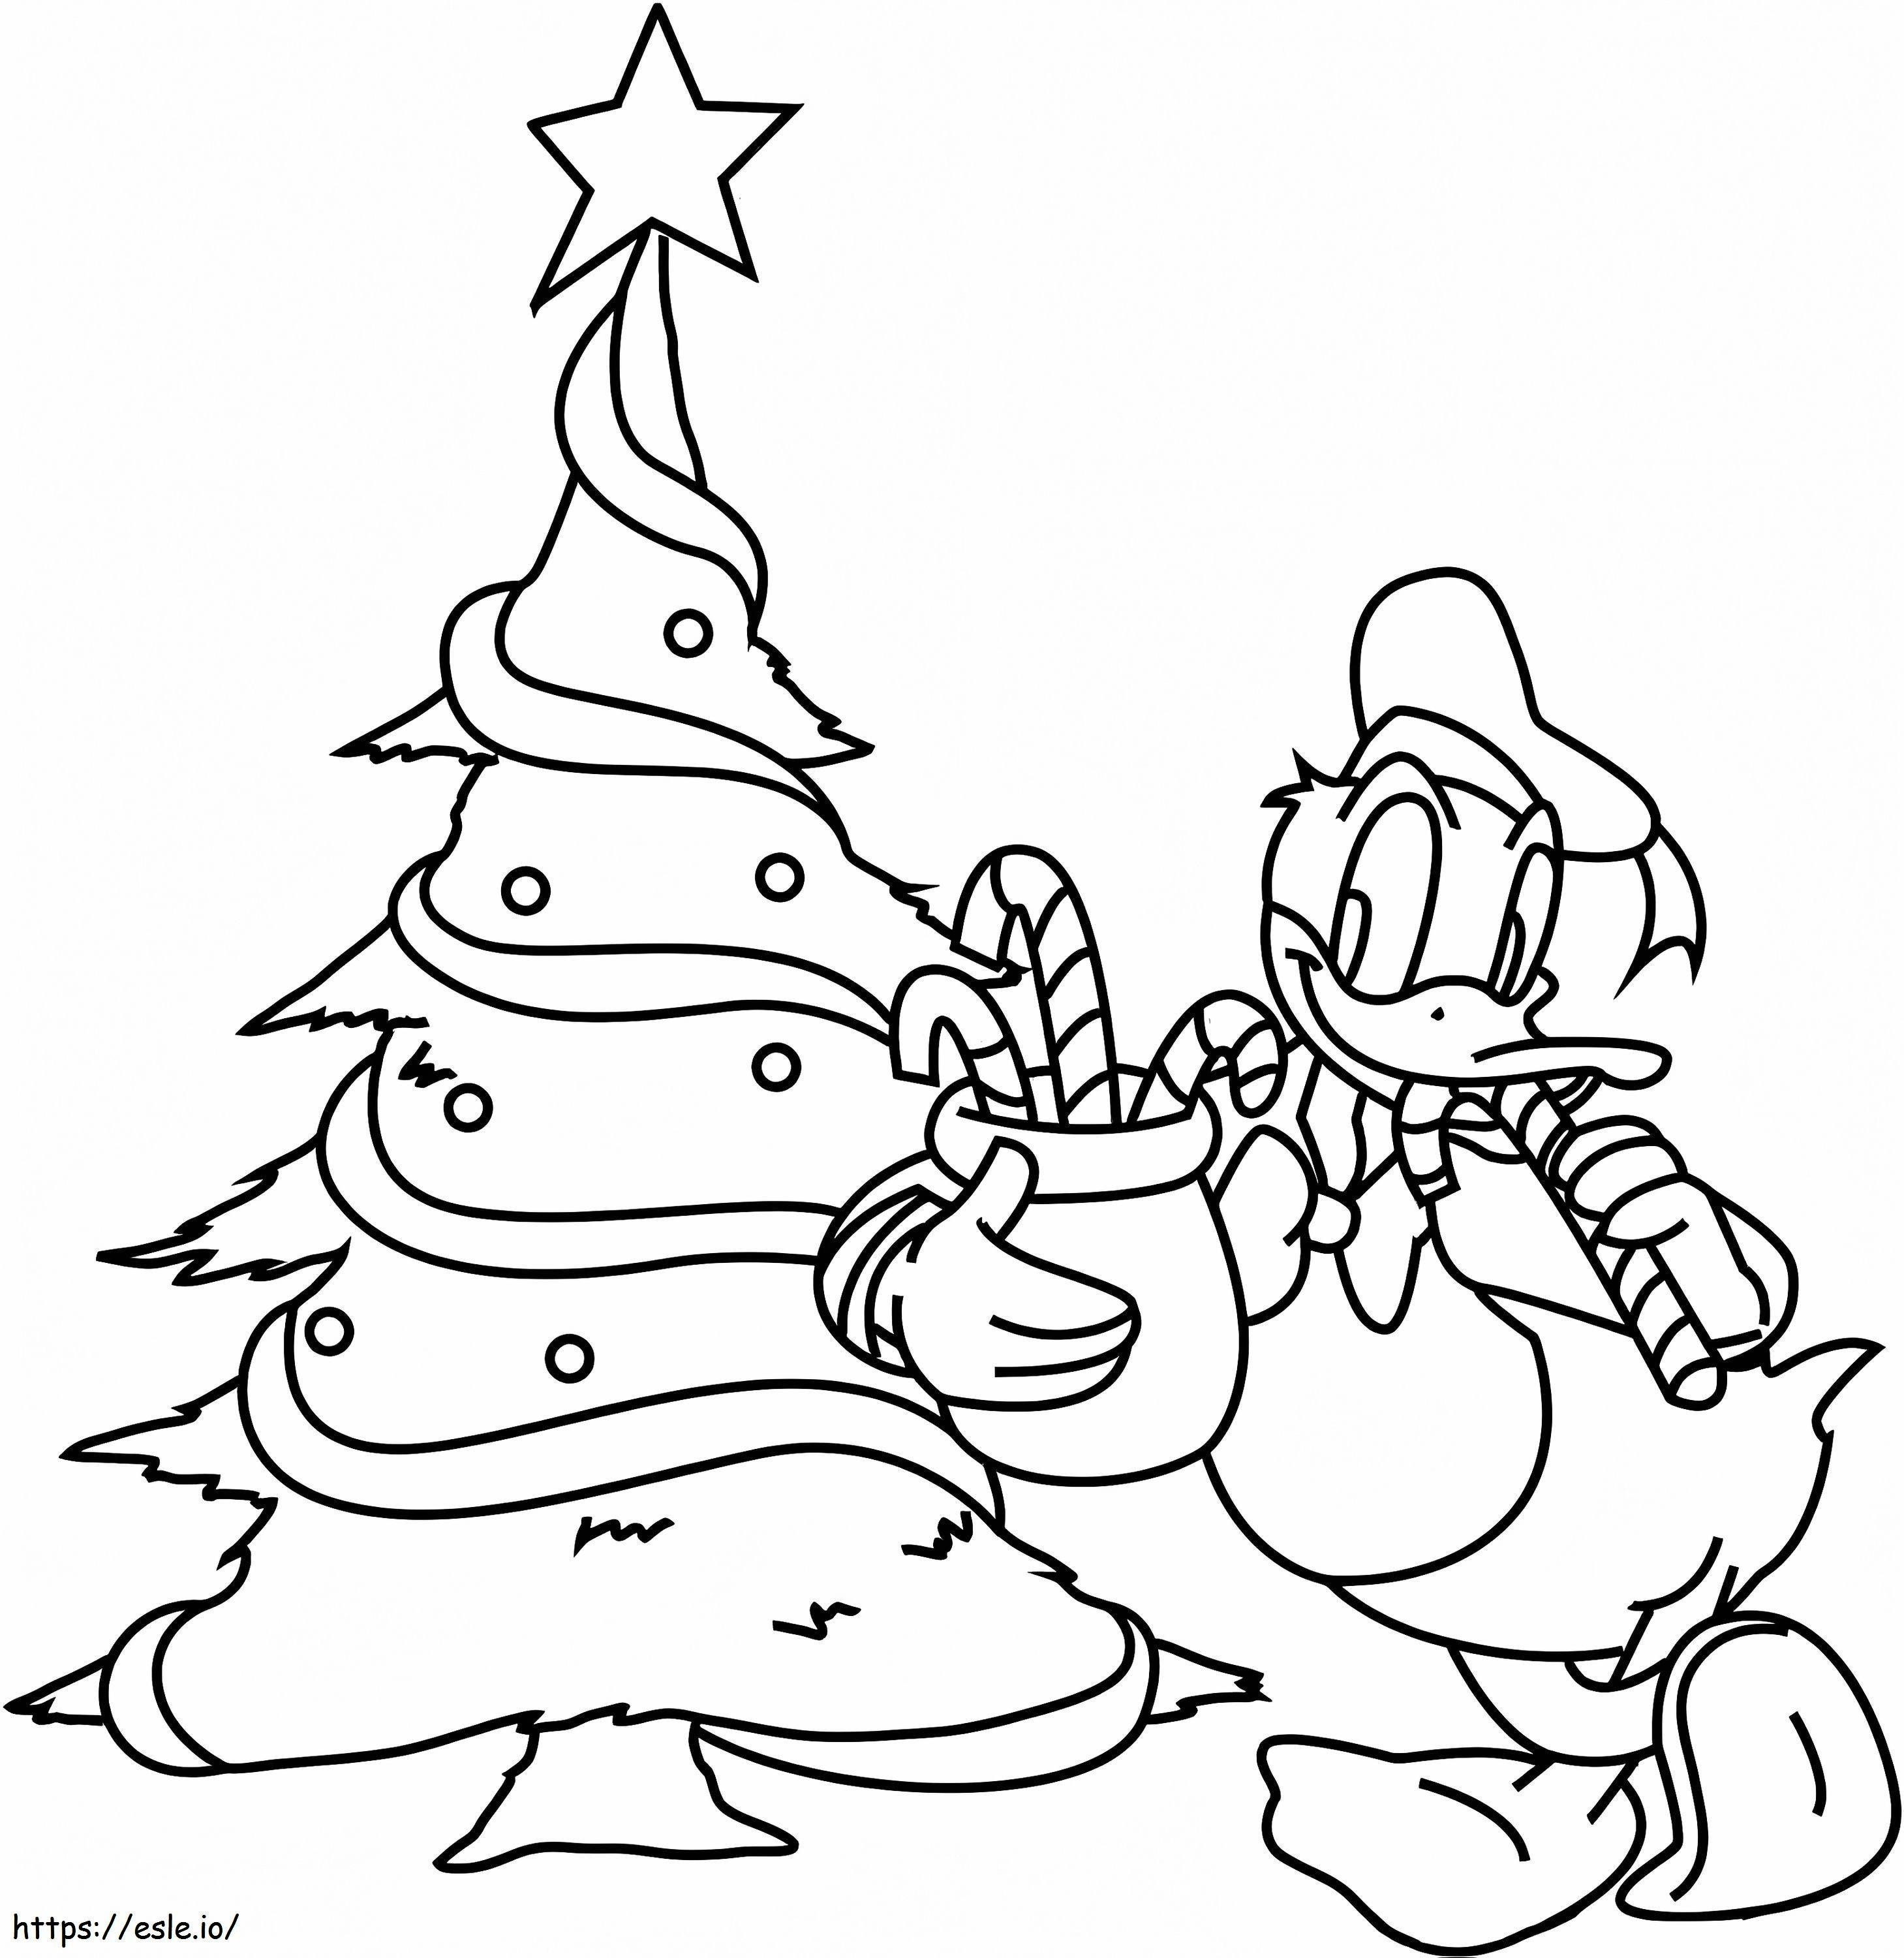 Donald Duck And Christmas Tree coloring page